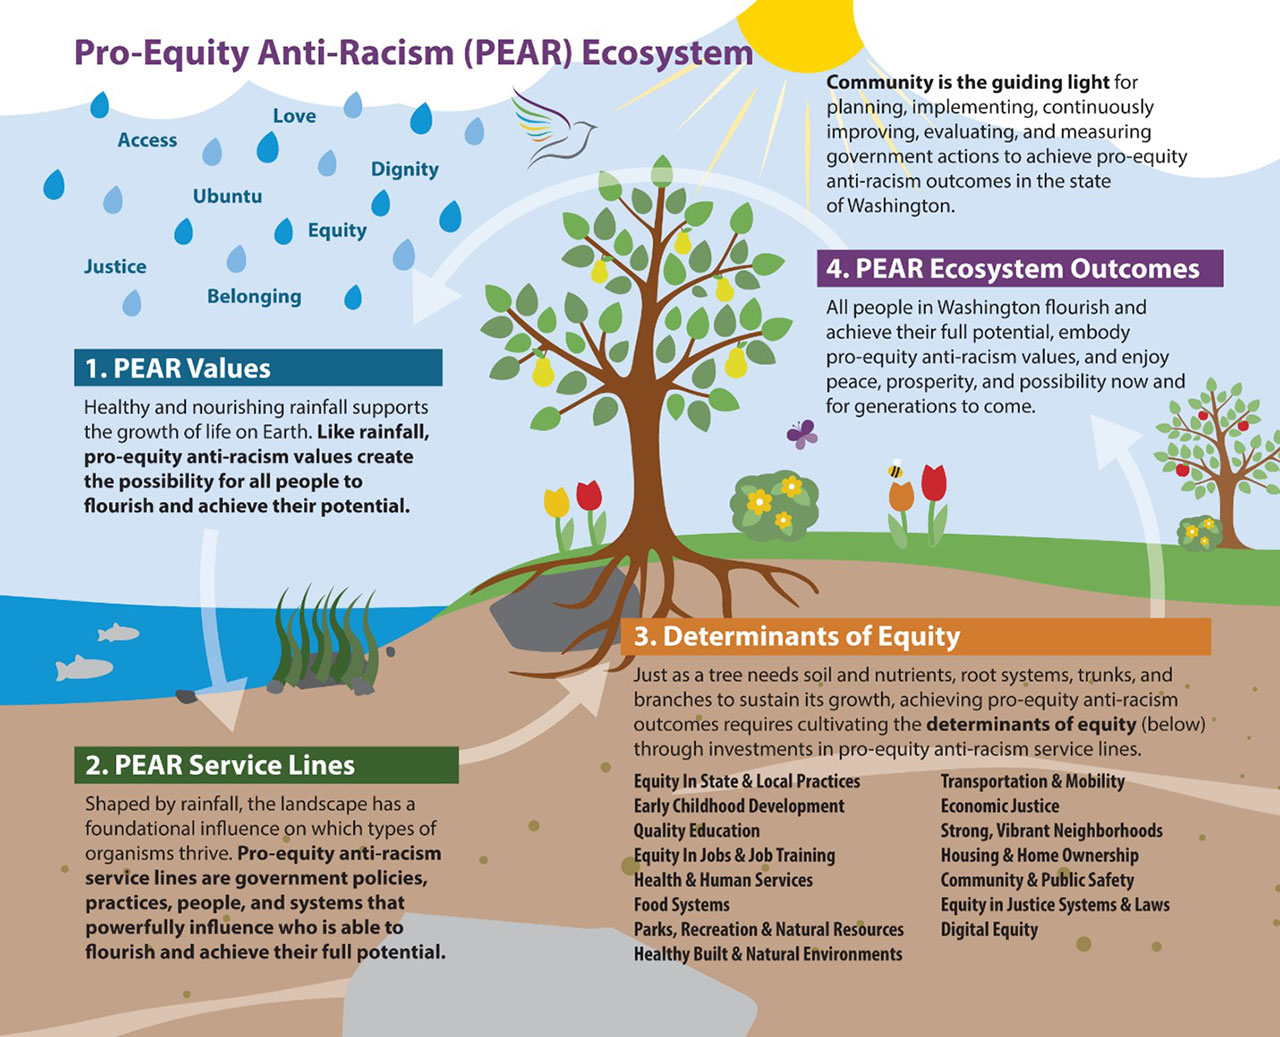 PEAR Ecosystem. PEAR Values, PEAR Service Lines, Determinants of Equity and PEAR Ecosystem Outcomes.